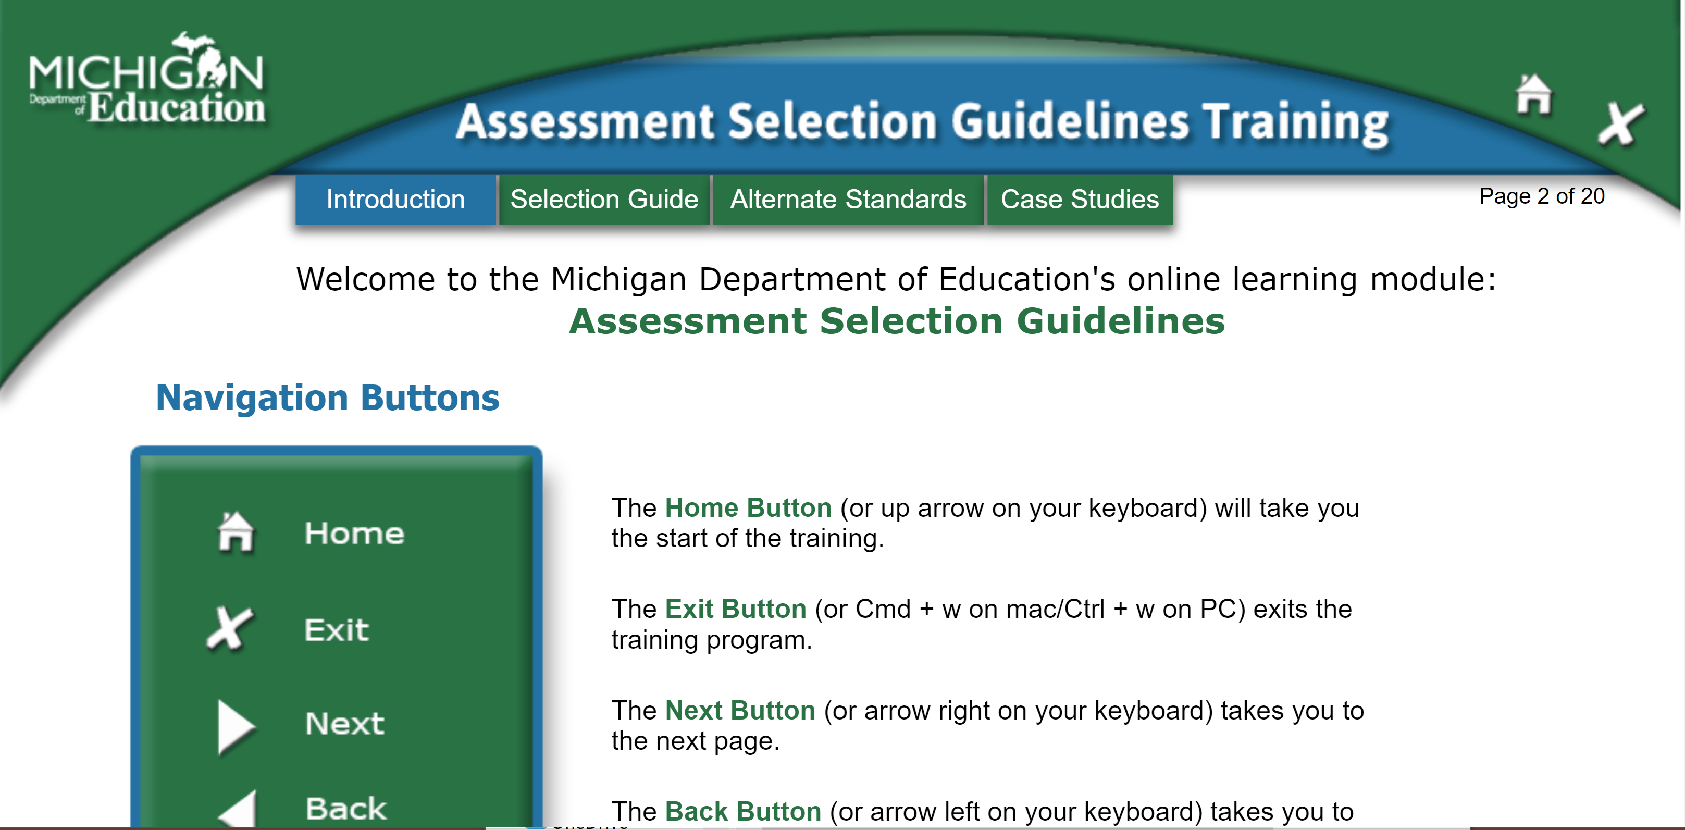 Michigan Resource 1: Assessment Selection Guidelines Training 